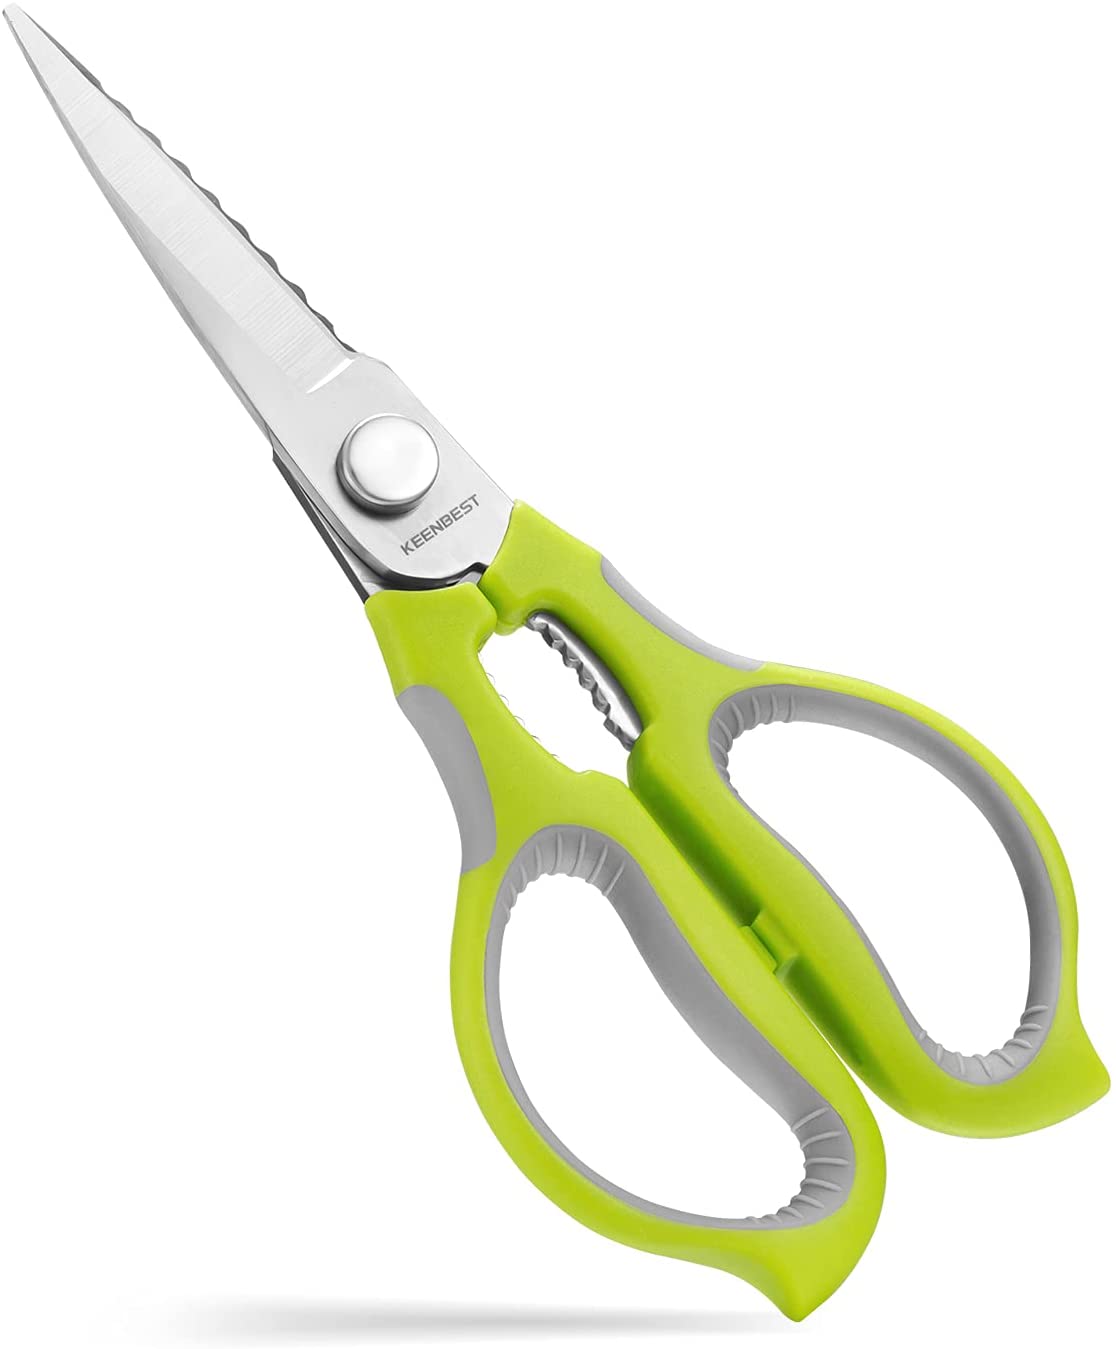 Kitchen Scissors All Purpose Kitchen Shears Heavy Duty Poultry Shears for Chicken Food Meat and Cooking, Stylish Green $2.79